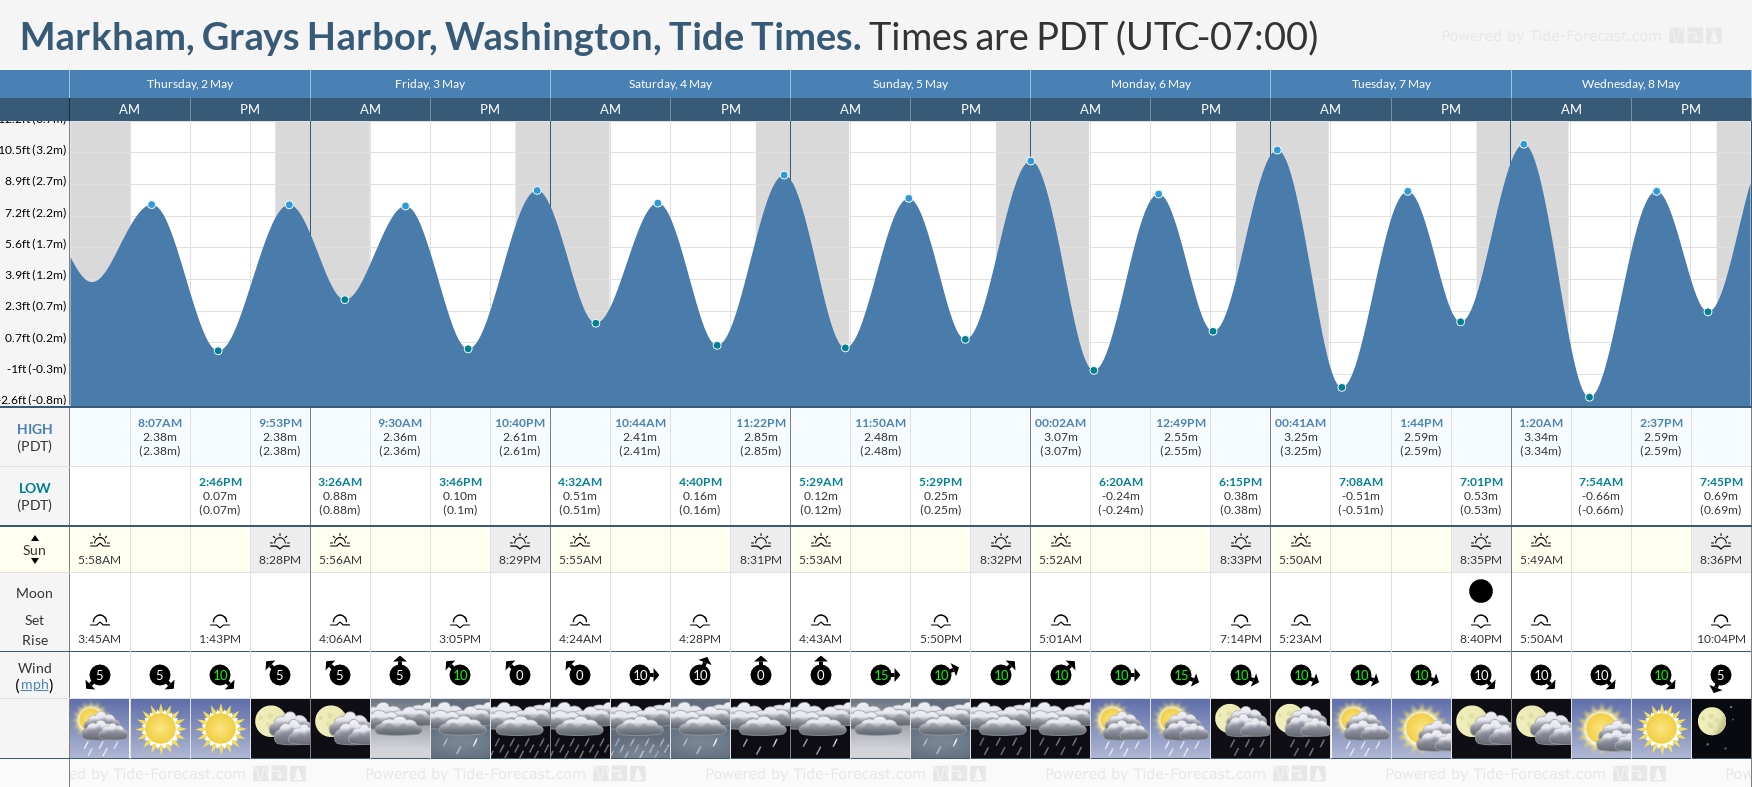 Markham, Grays Harbor, Washington Tide Chart including high and low tide tide times for the next 7 days